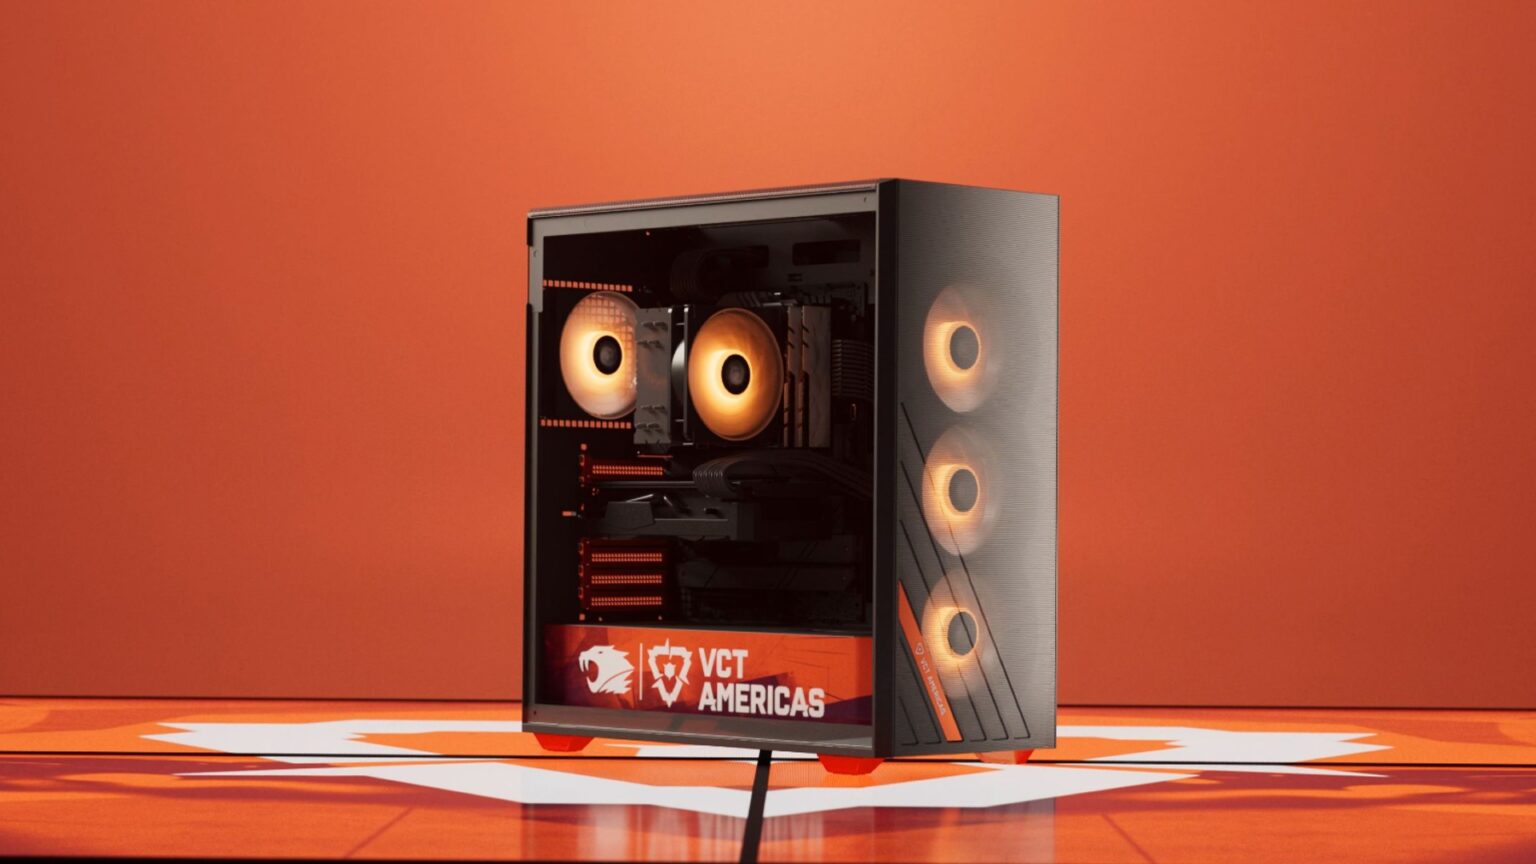 iBUYPOWER debuts new Valorant gaming PCs, available at Best Buy